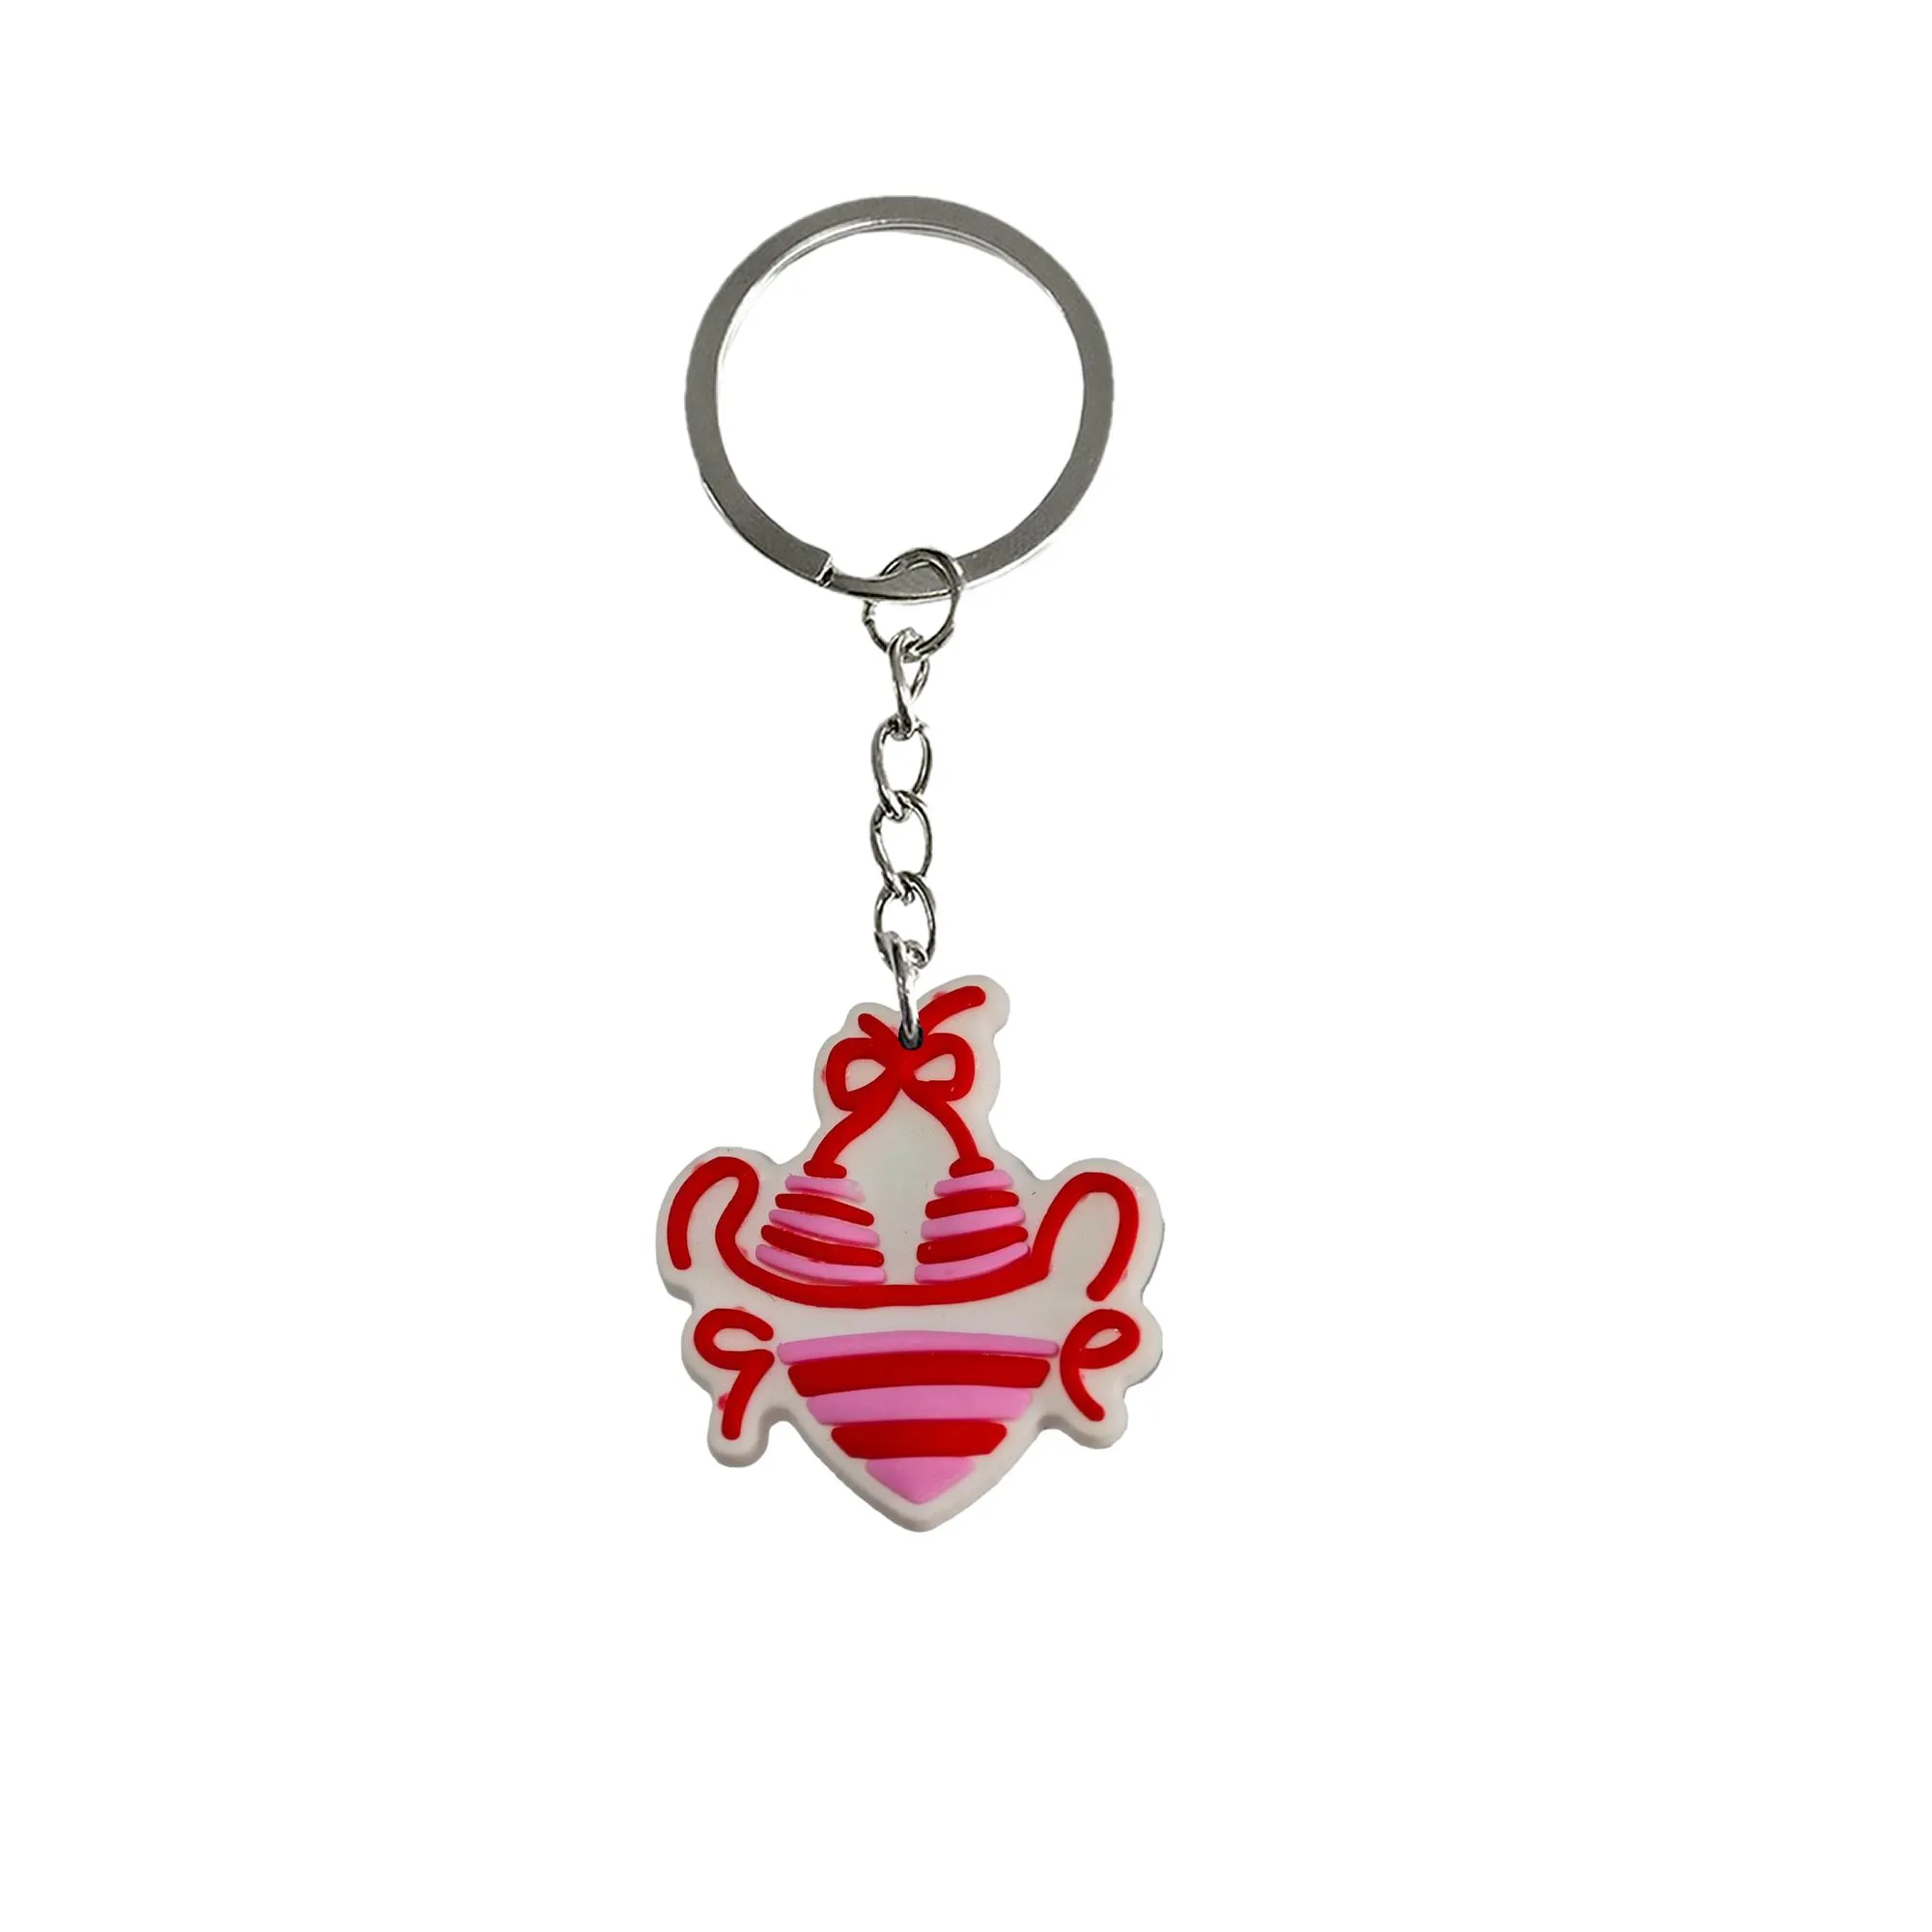 pink theme 2 25 keychain anime cool keychains for backpacks backpack keyring women suitable schoolbag tags goodie bag stuffer christmas gifts pendants accessories kids birthday party favors key chain handbag and car gift valentines day